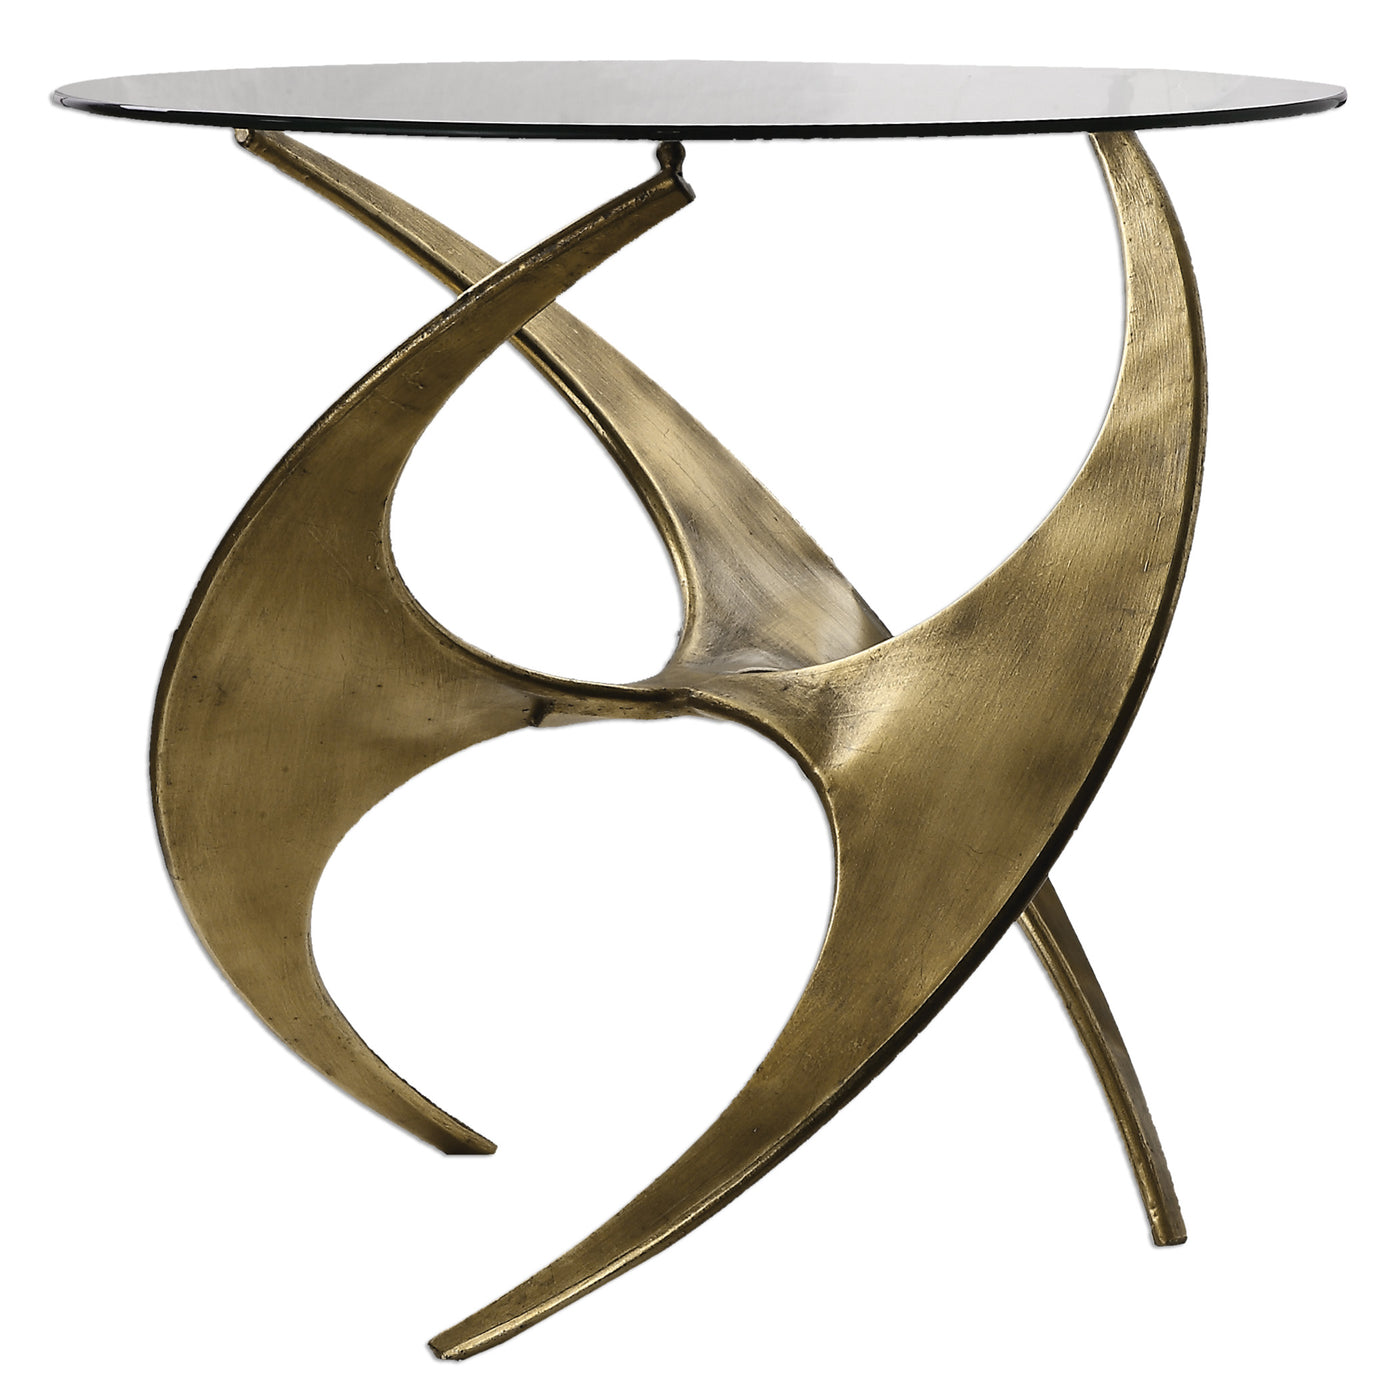 Artfully Sculpted Metal Base In Antique Gold With A Tempered Glass Top.